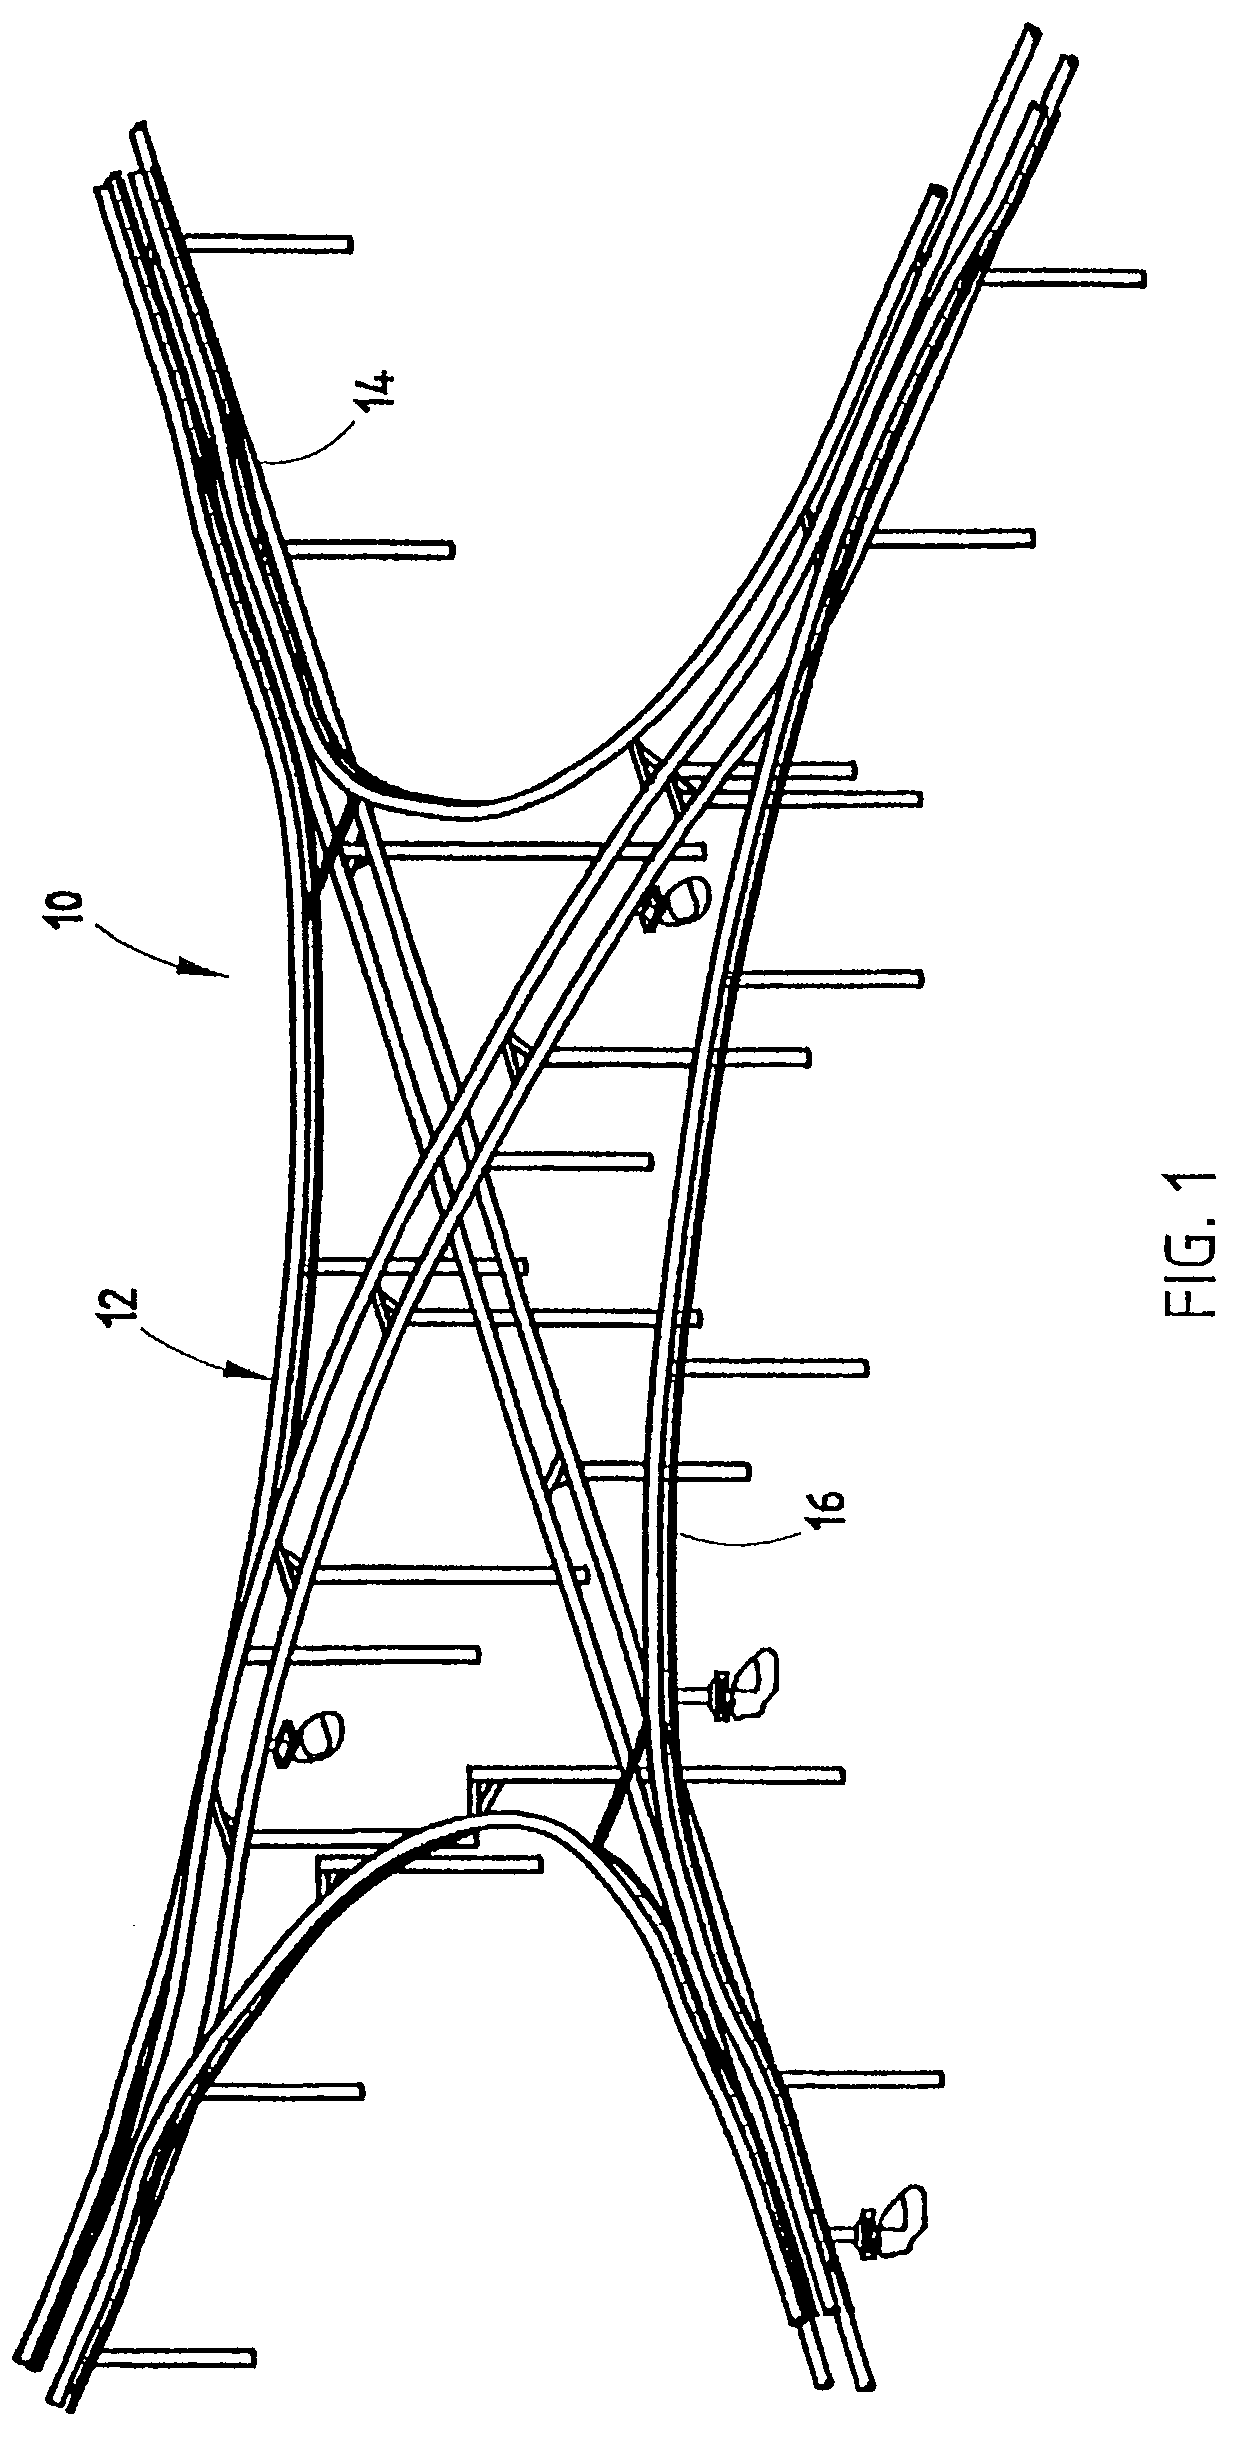 Individual transport control and communication system